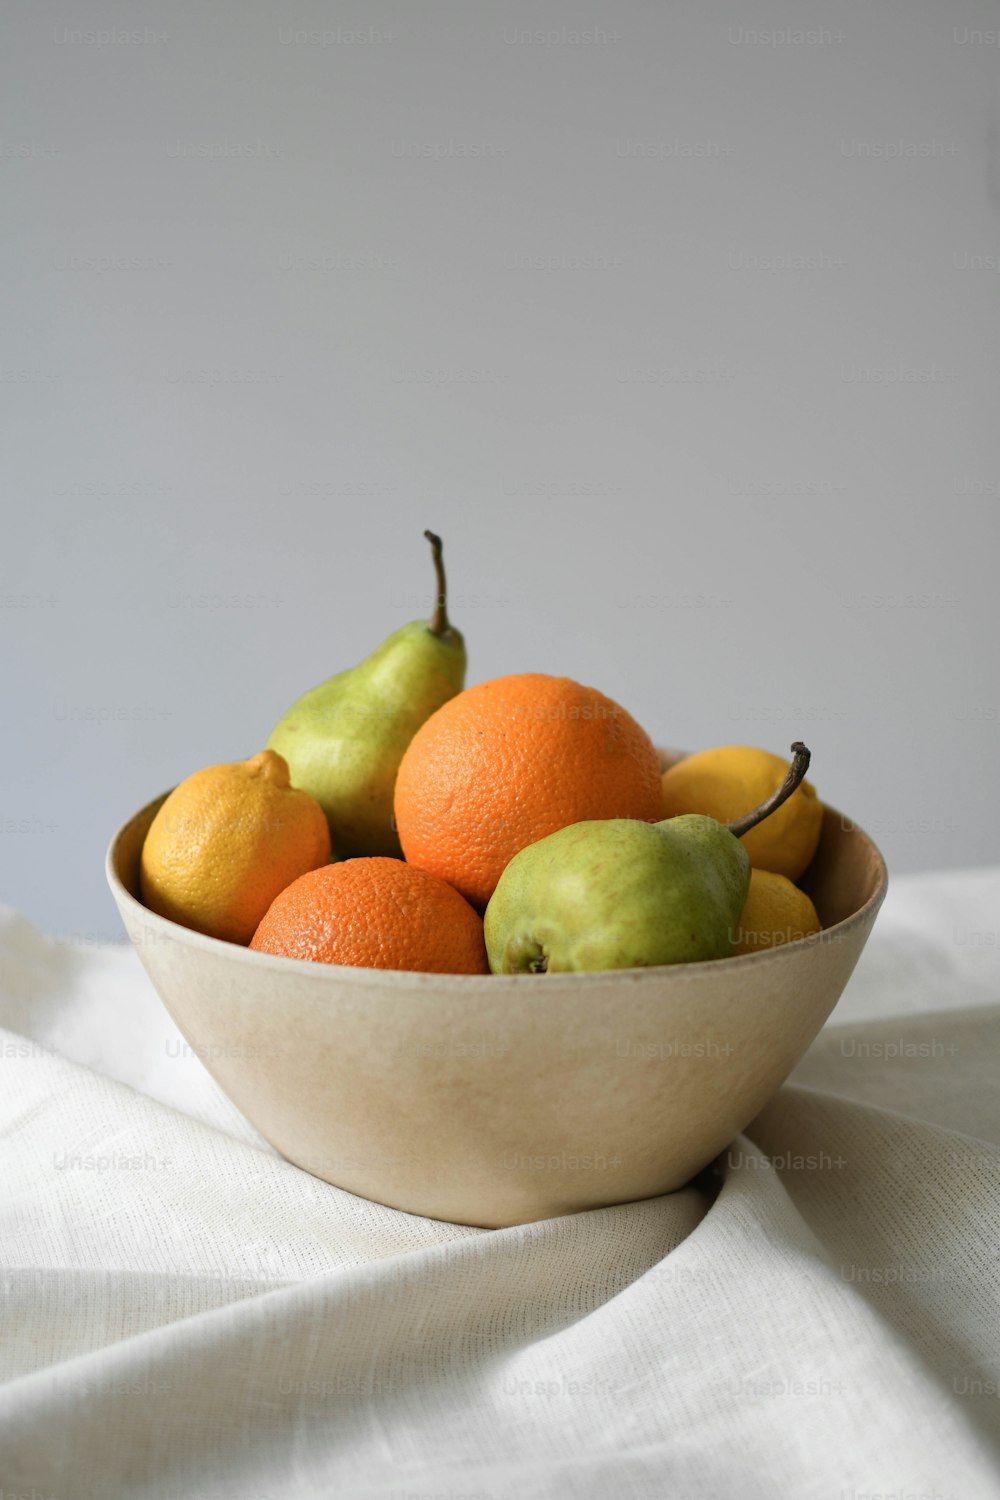 a bowl of oranges and pears on a white cloth